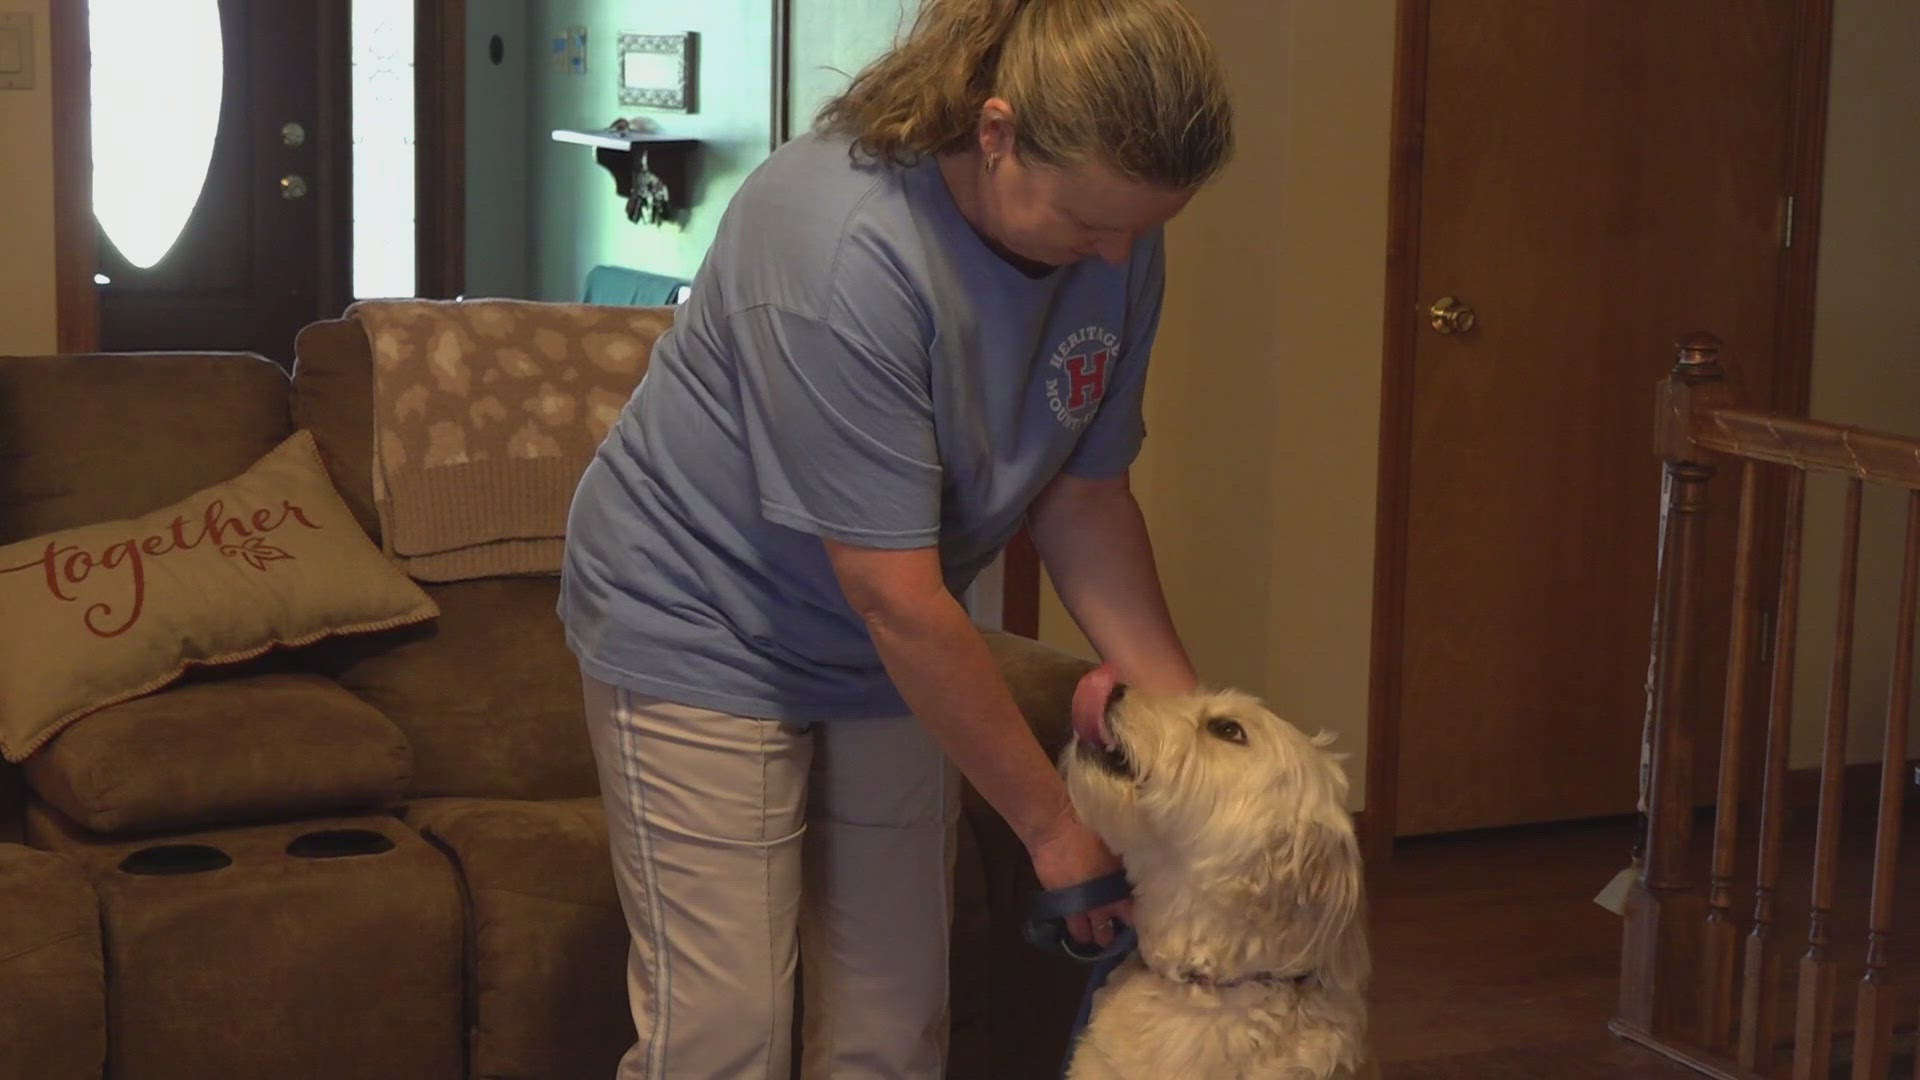 Cheryl Varitek opens up about how she and her dog had to hide for safety when a shooting broke out in her neighborhood.